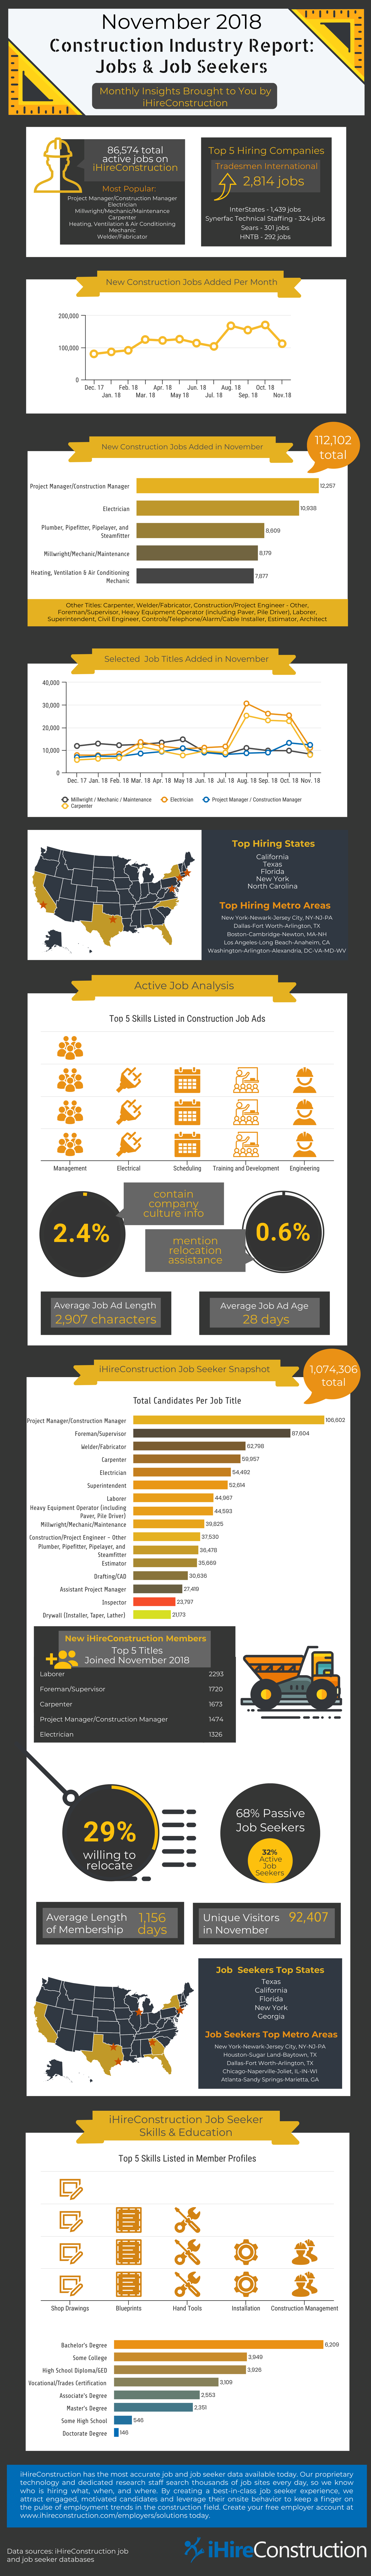 iHireConstruction's November 2018 industry report on construction jobs and job seekers. Infographic.